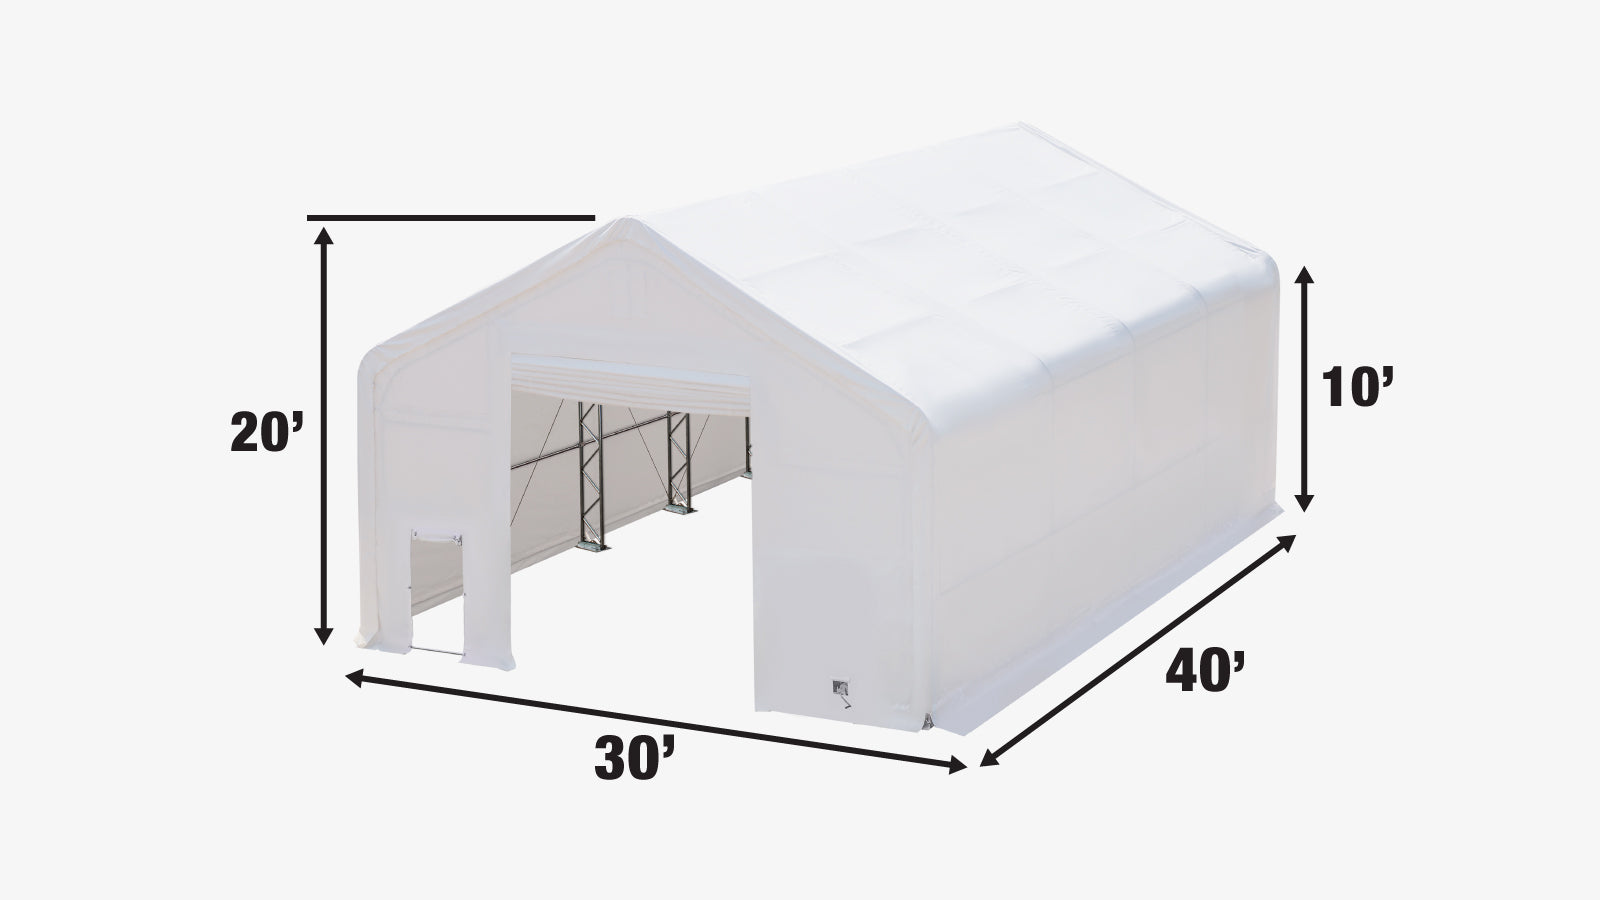 TMG Industrial 30' x 40' Dual Truss Storage Shelter with Heavy Duty 17 oz PVC Cover, TMG-DT3041-specifications-image